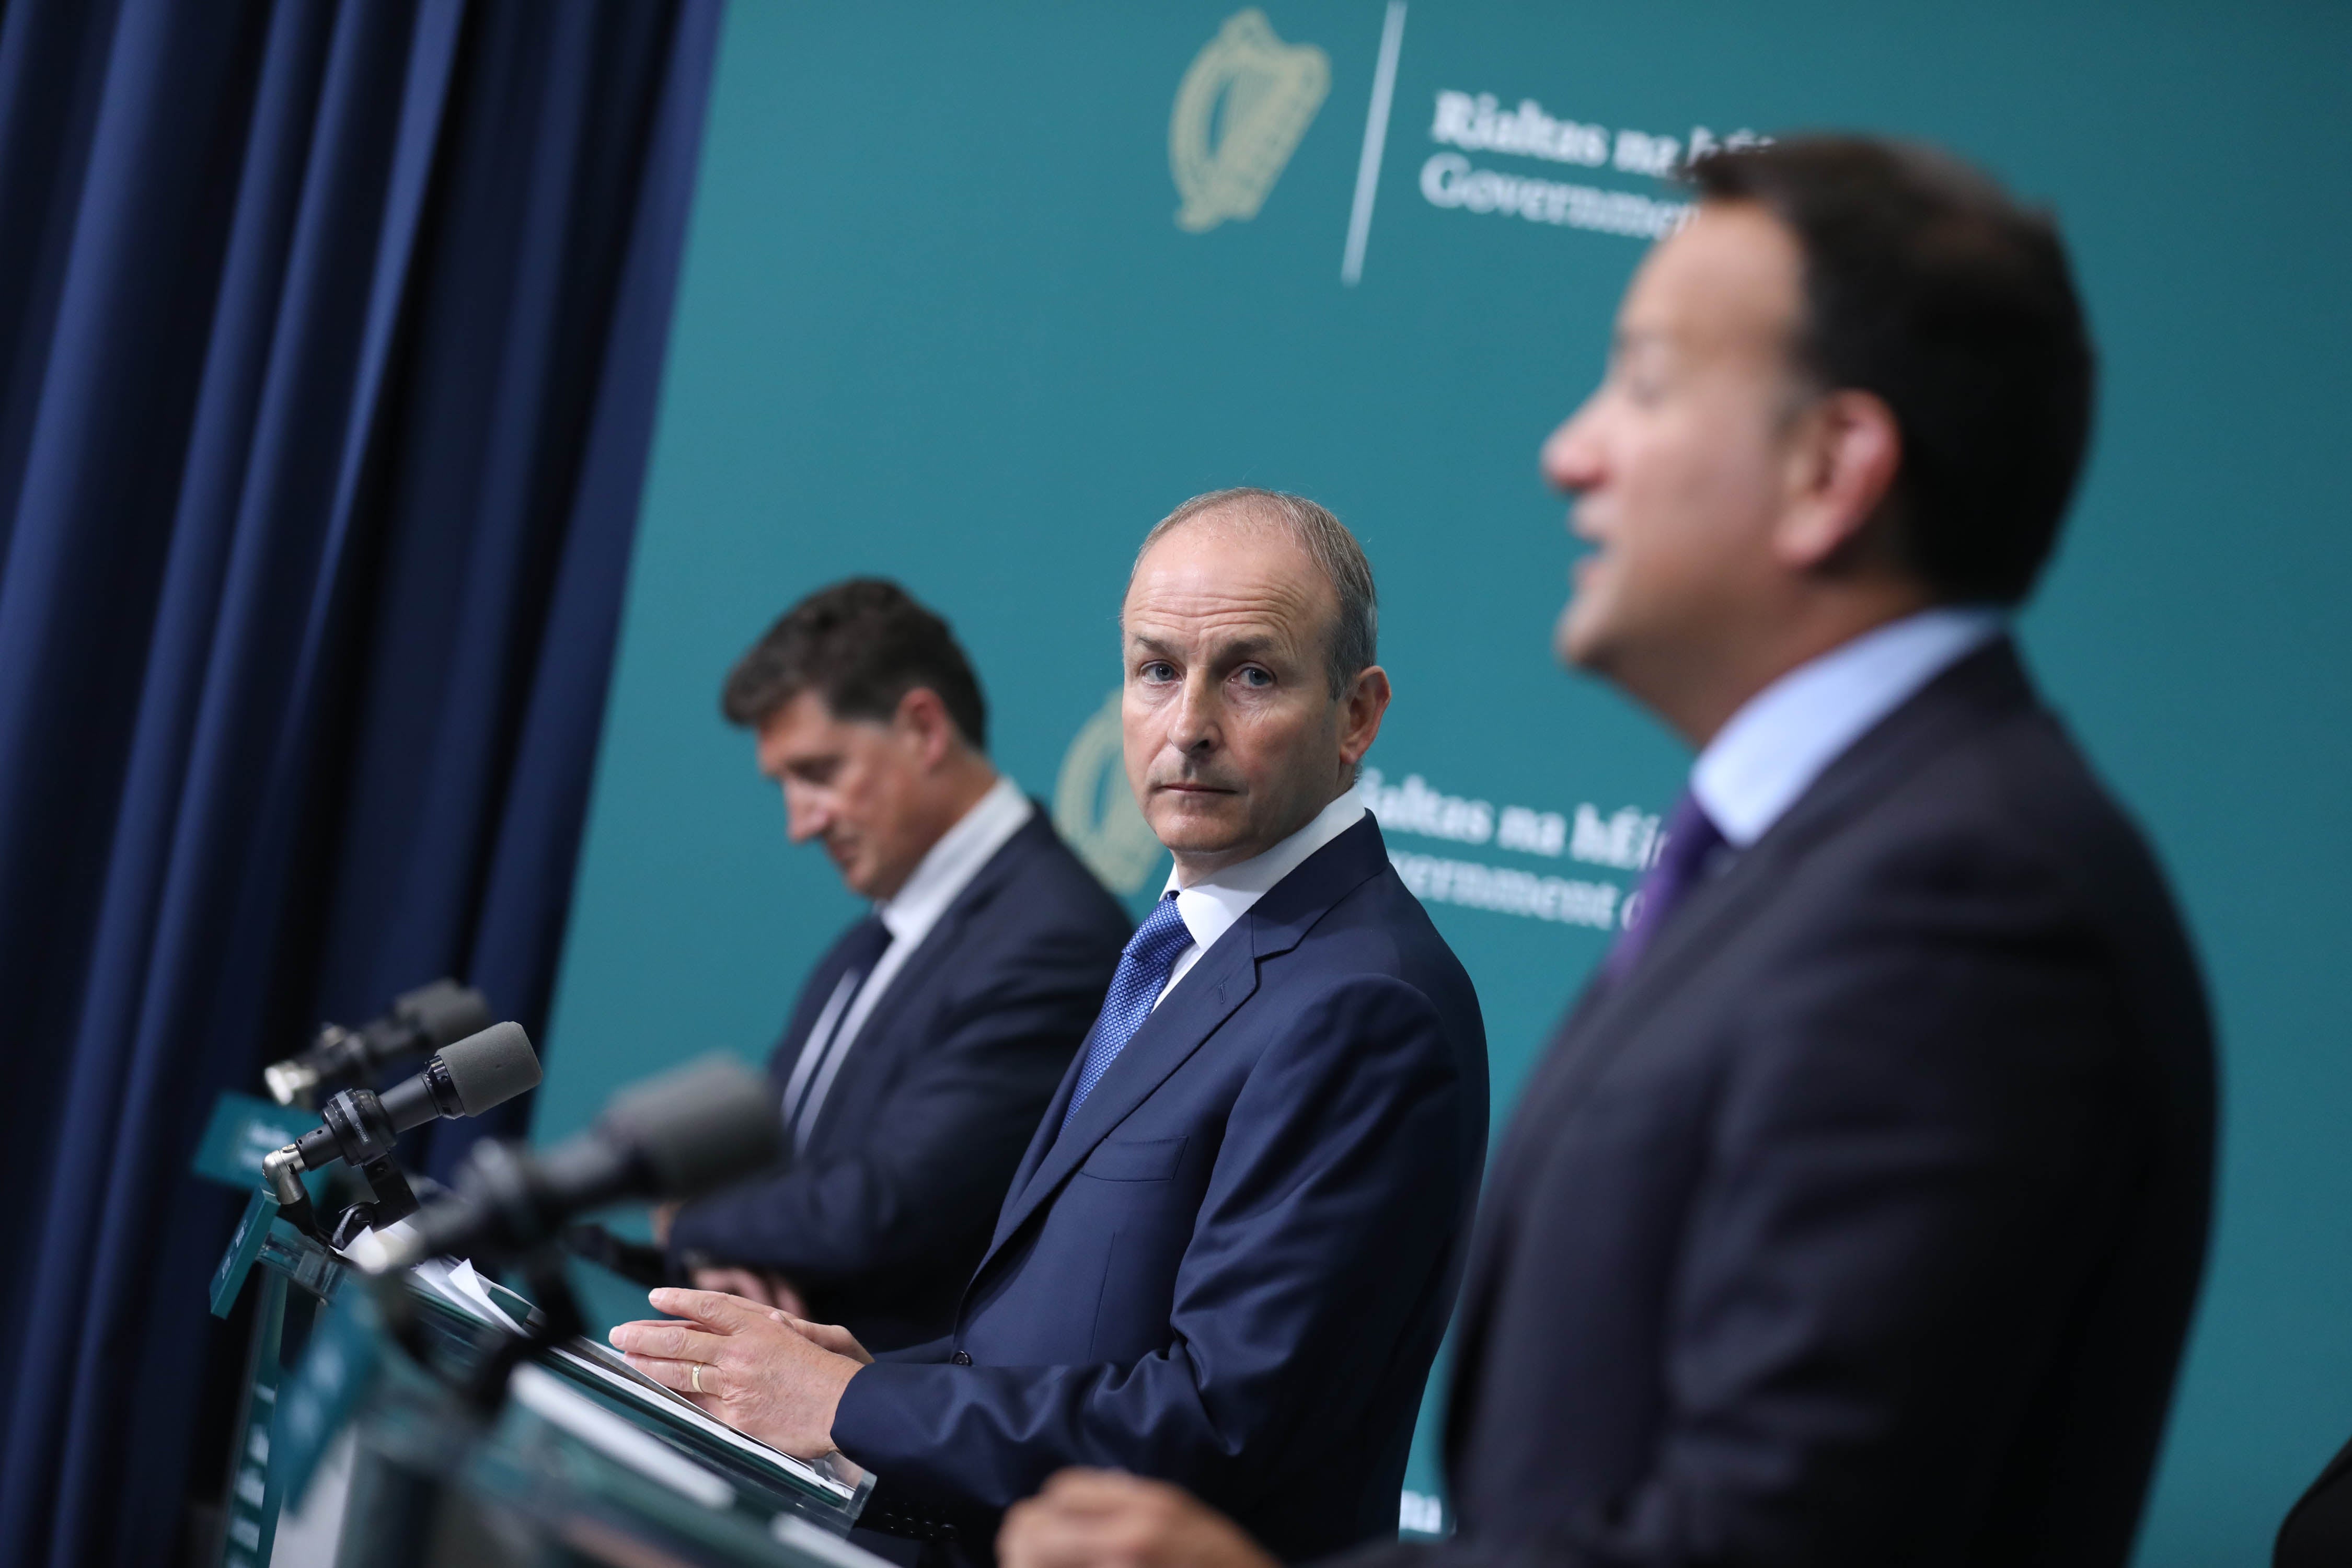 (left to right) Eamon Ryan Minister for the Environment Climate and Communications, Taoiseach Michael Martin and Tanaiste Leo Varadkar (PA)